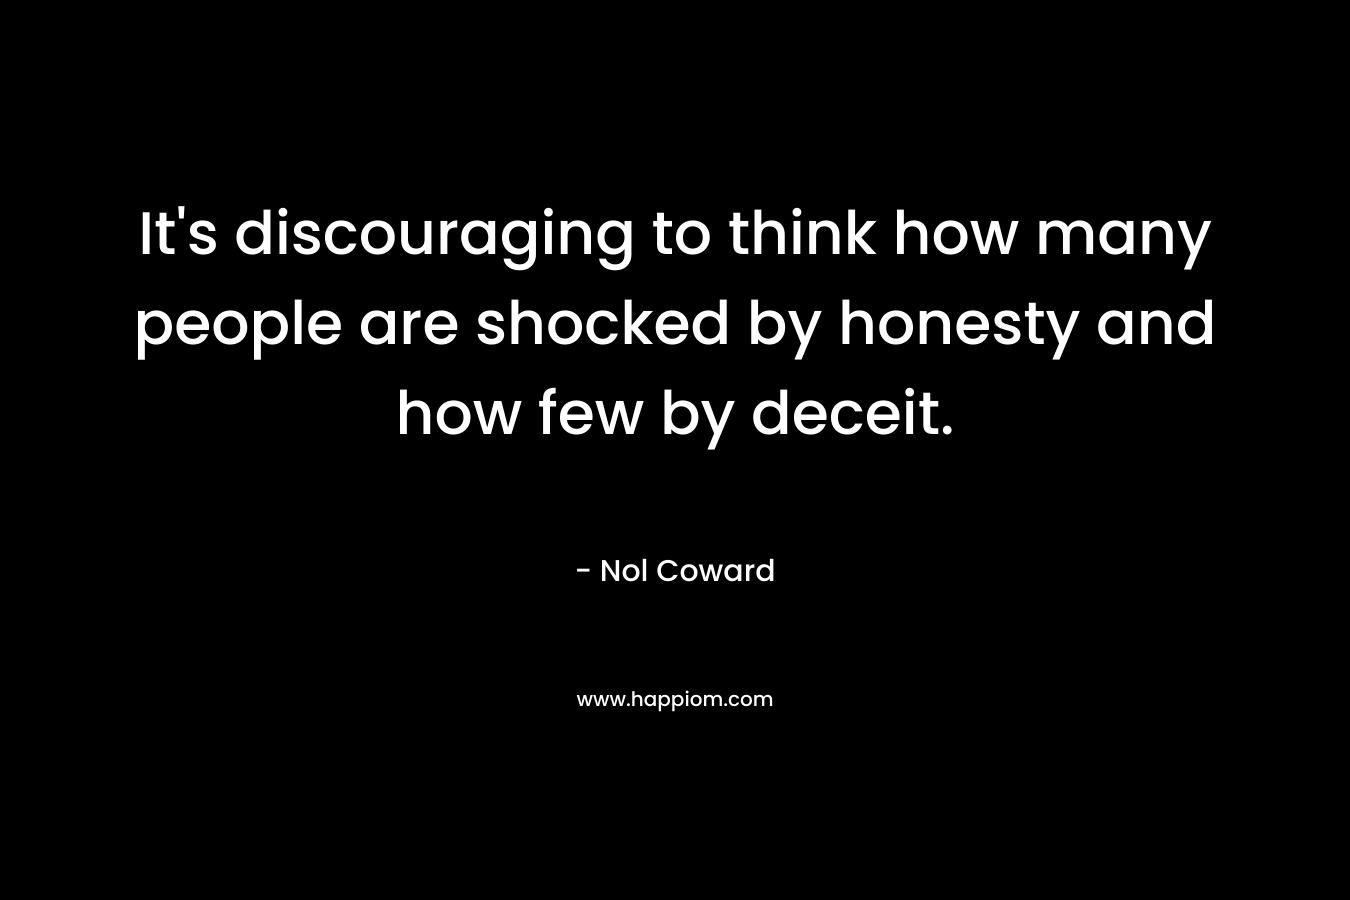 It’s discouraging to think how many people are shocked by honesty and how few by deceit. – Nol Coward